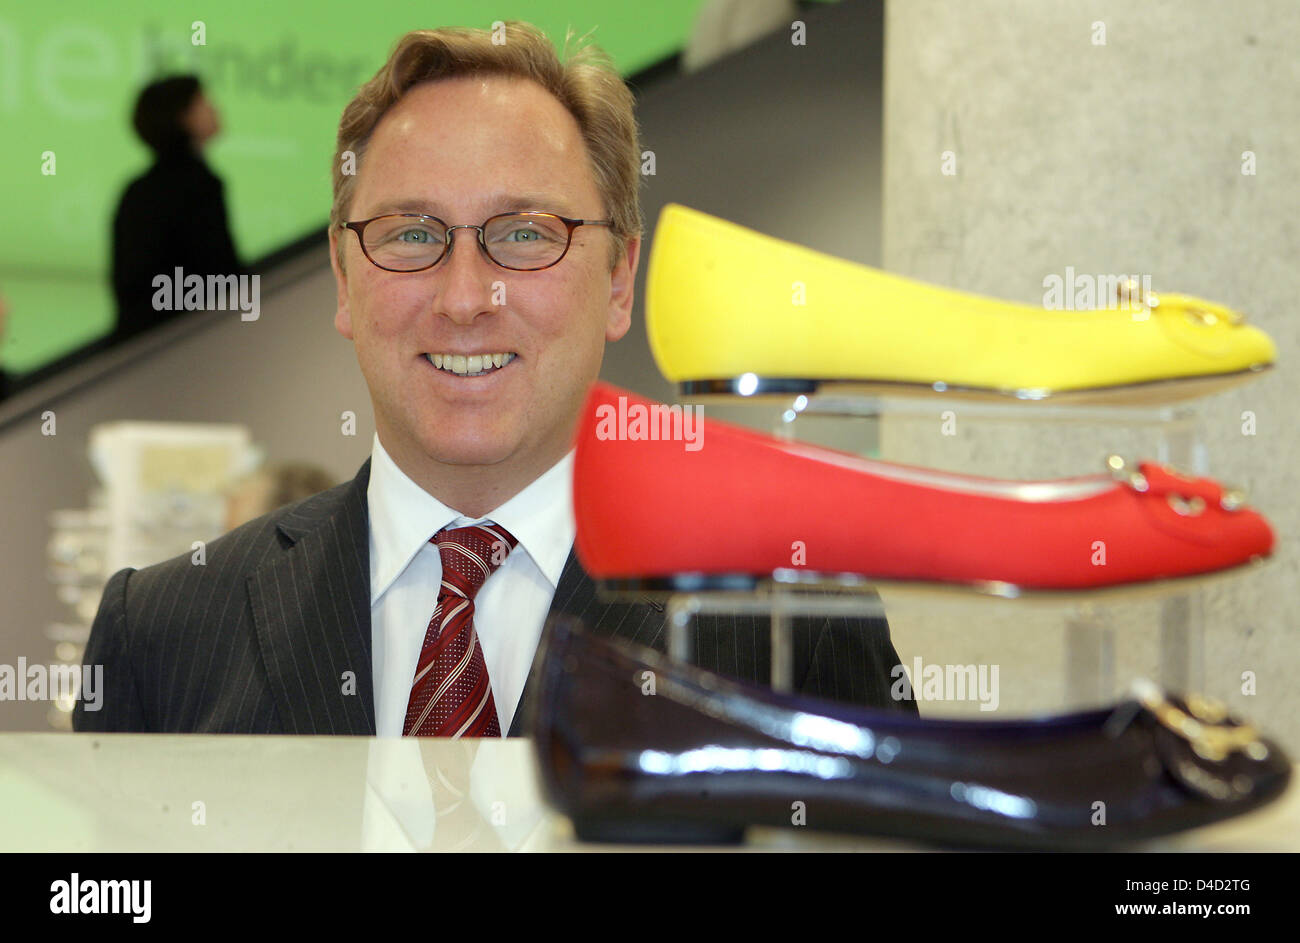 The CEO of shoe group Deichmann, Heinrich Deichmann is pictured in a Stock  Photo - Alamy